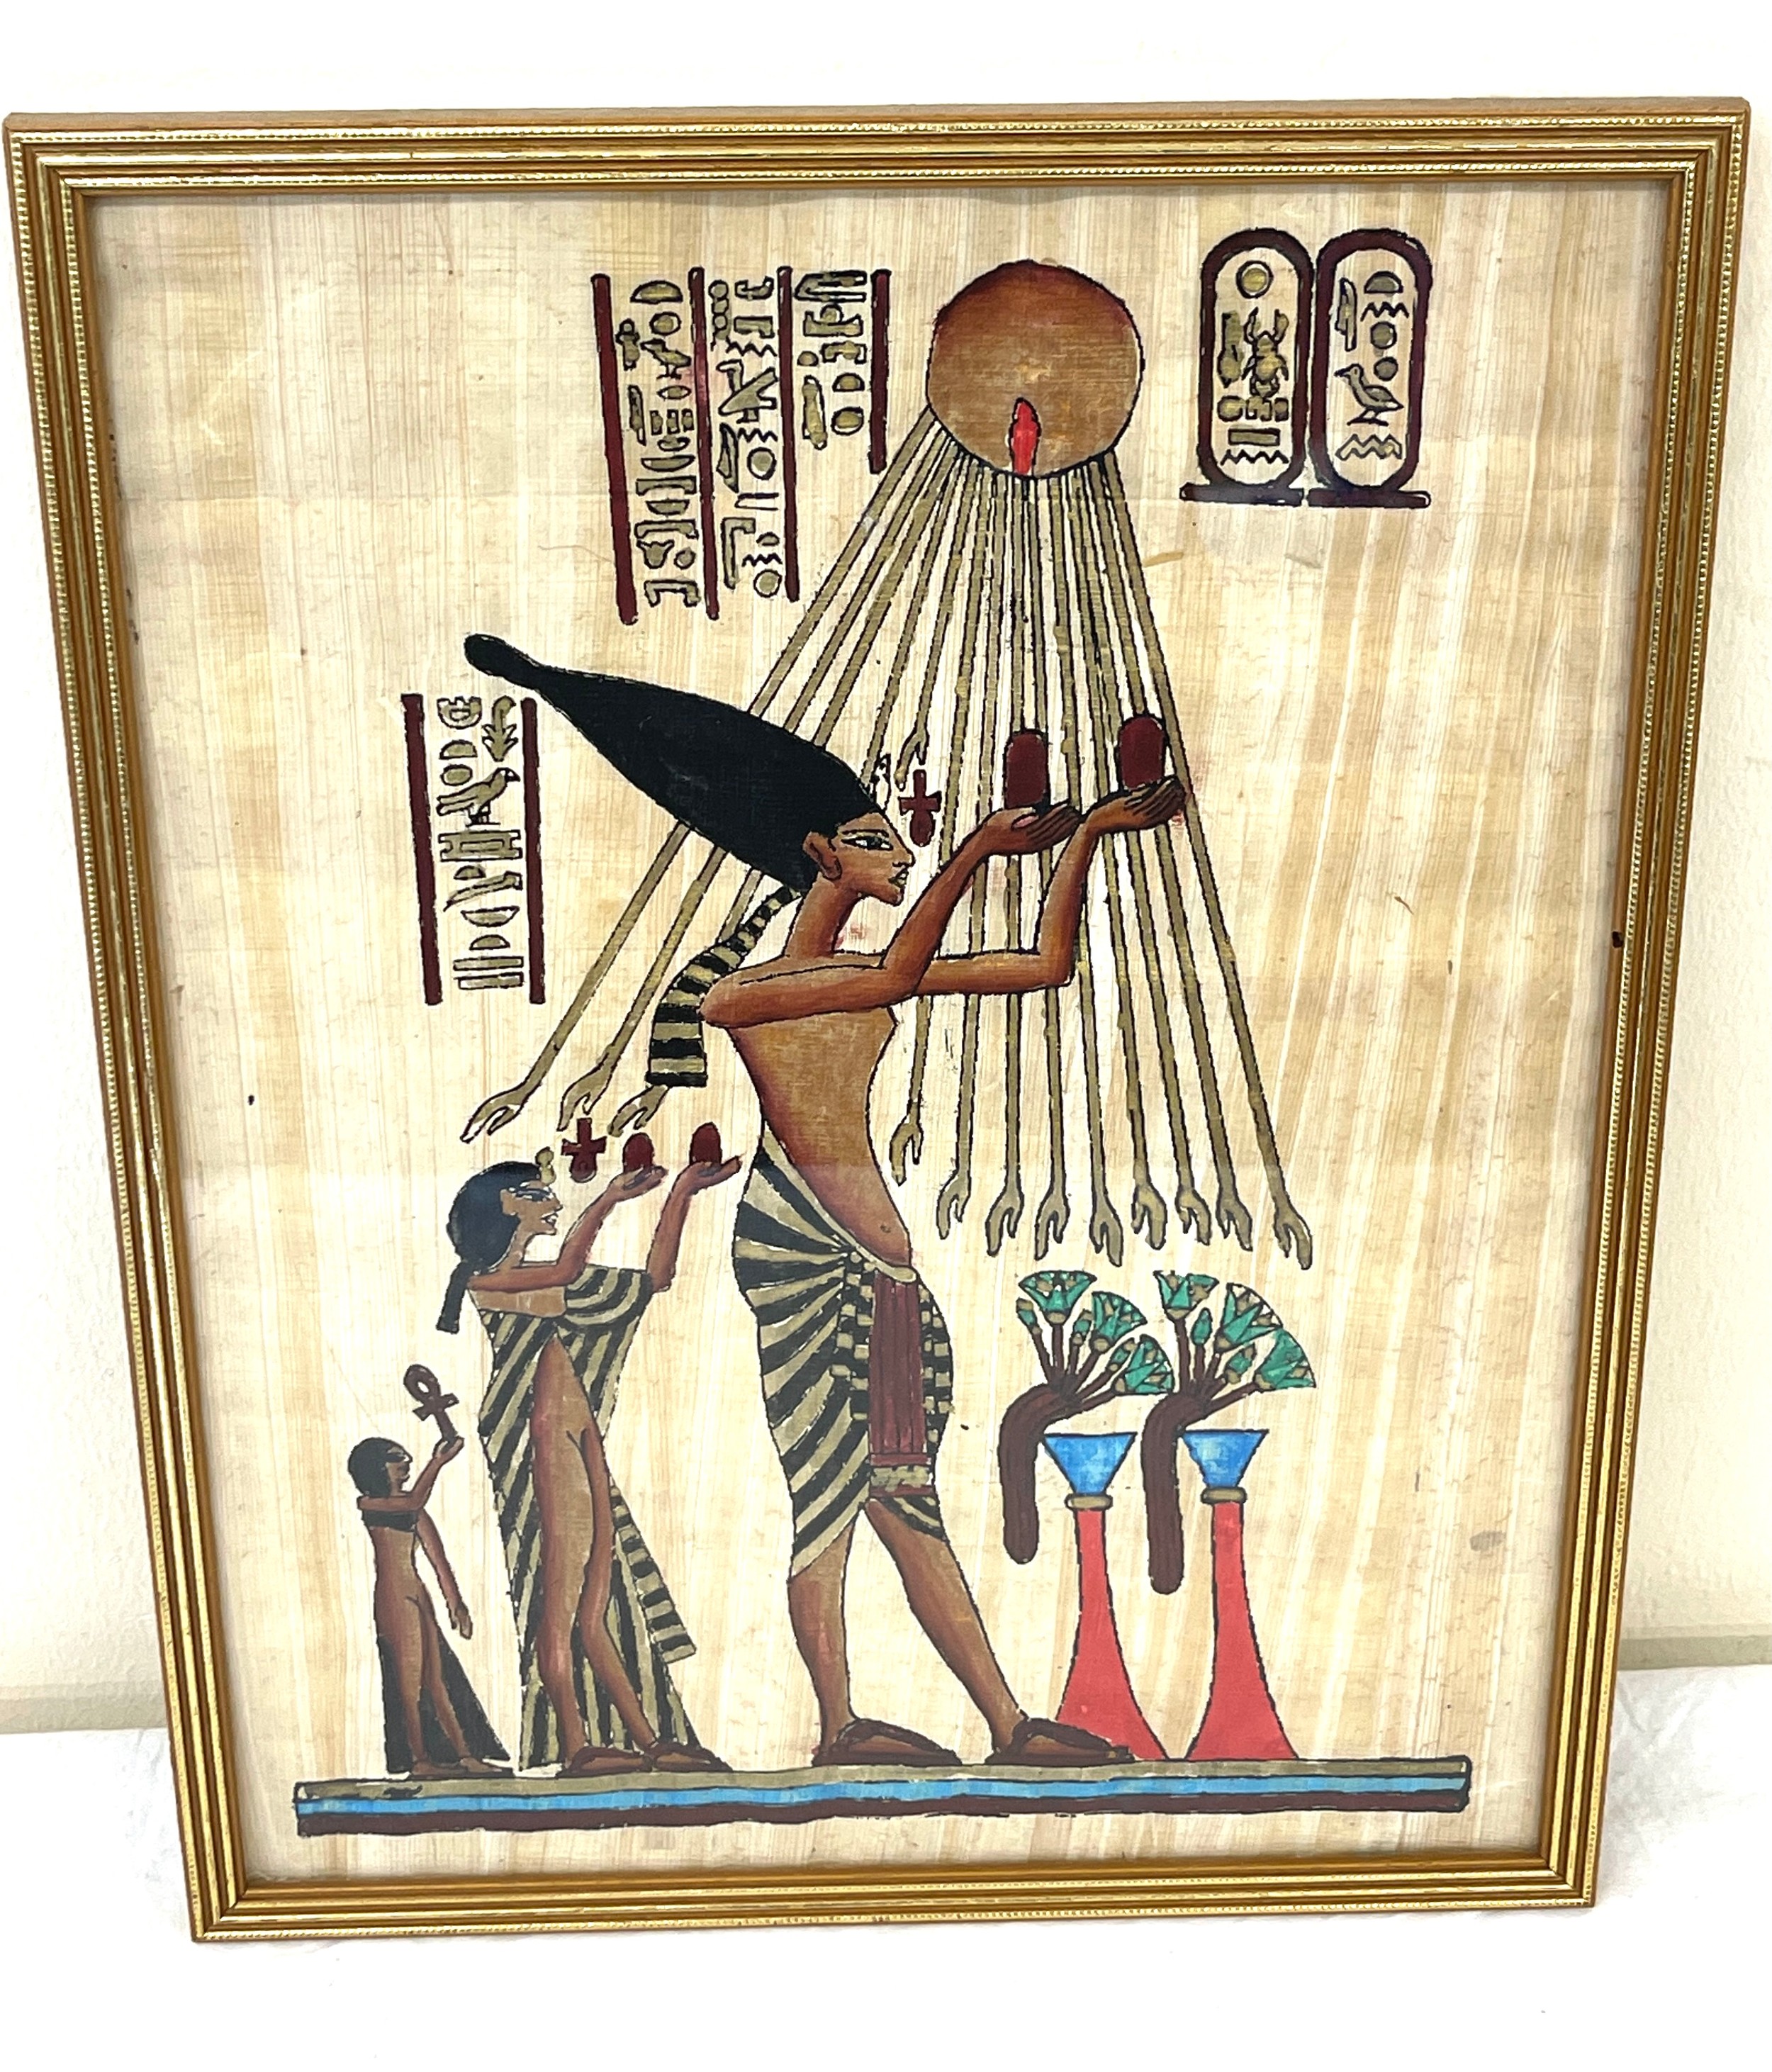 Vintage framed Egyptian painting on silk, approximate measurements of frame: Height 38cm, Width 30cm